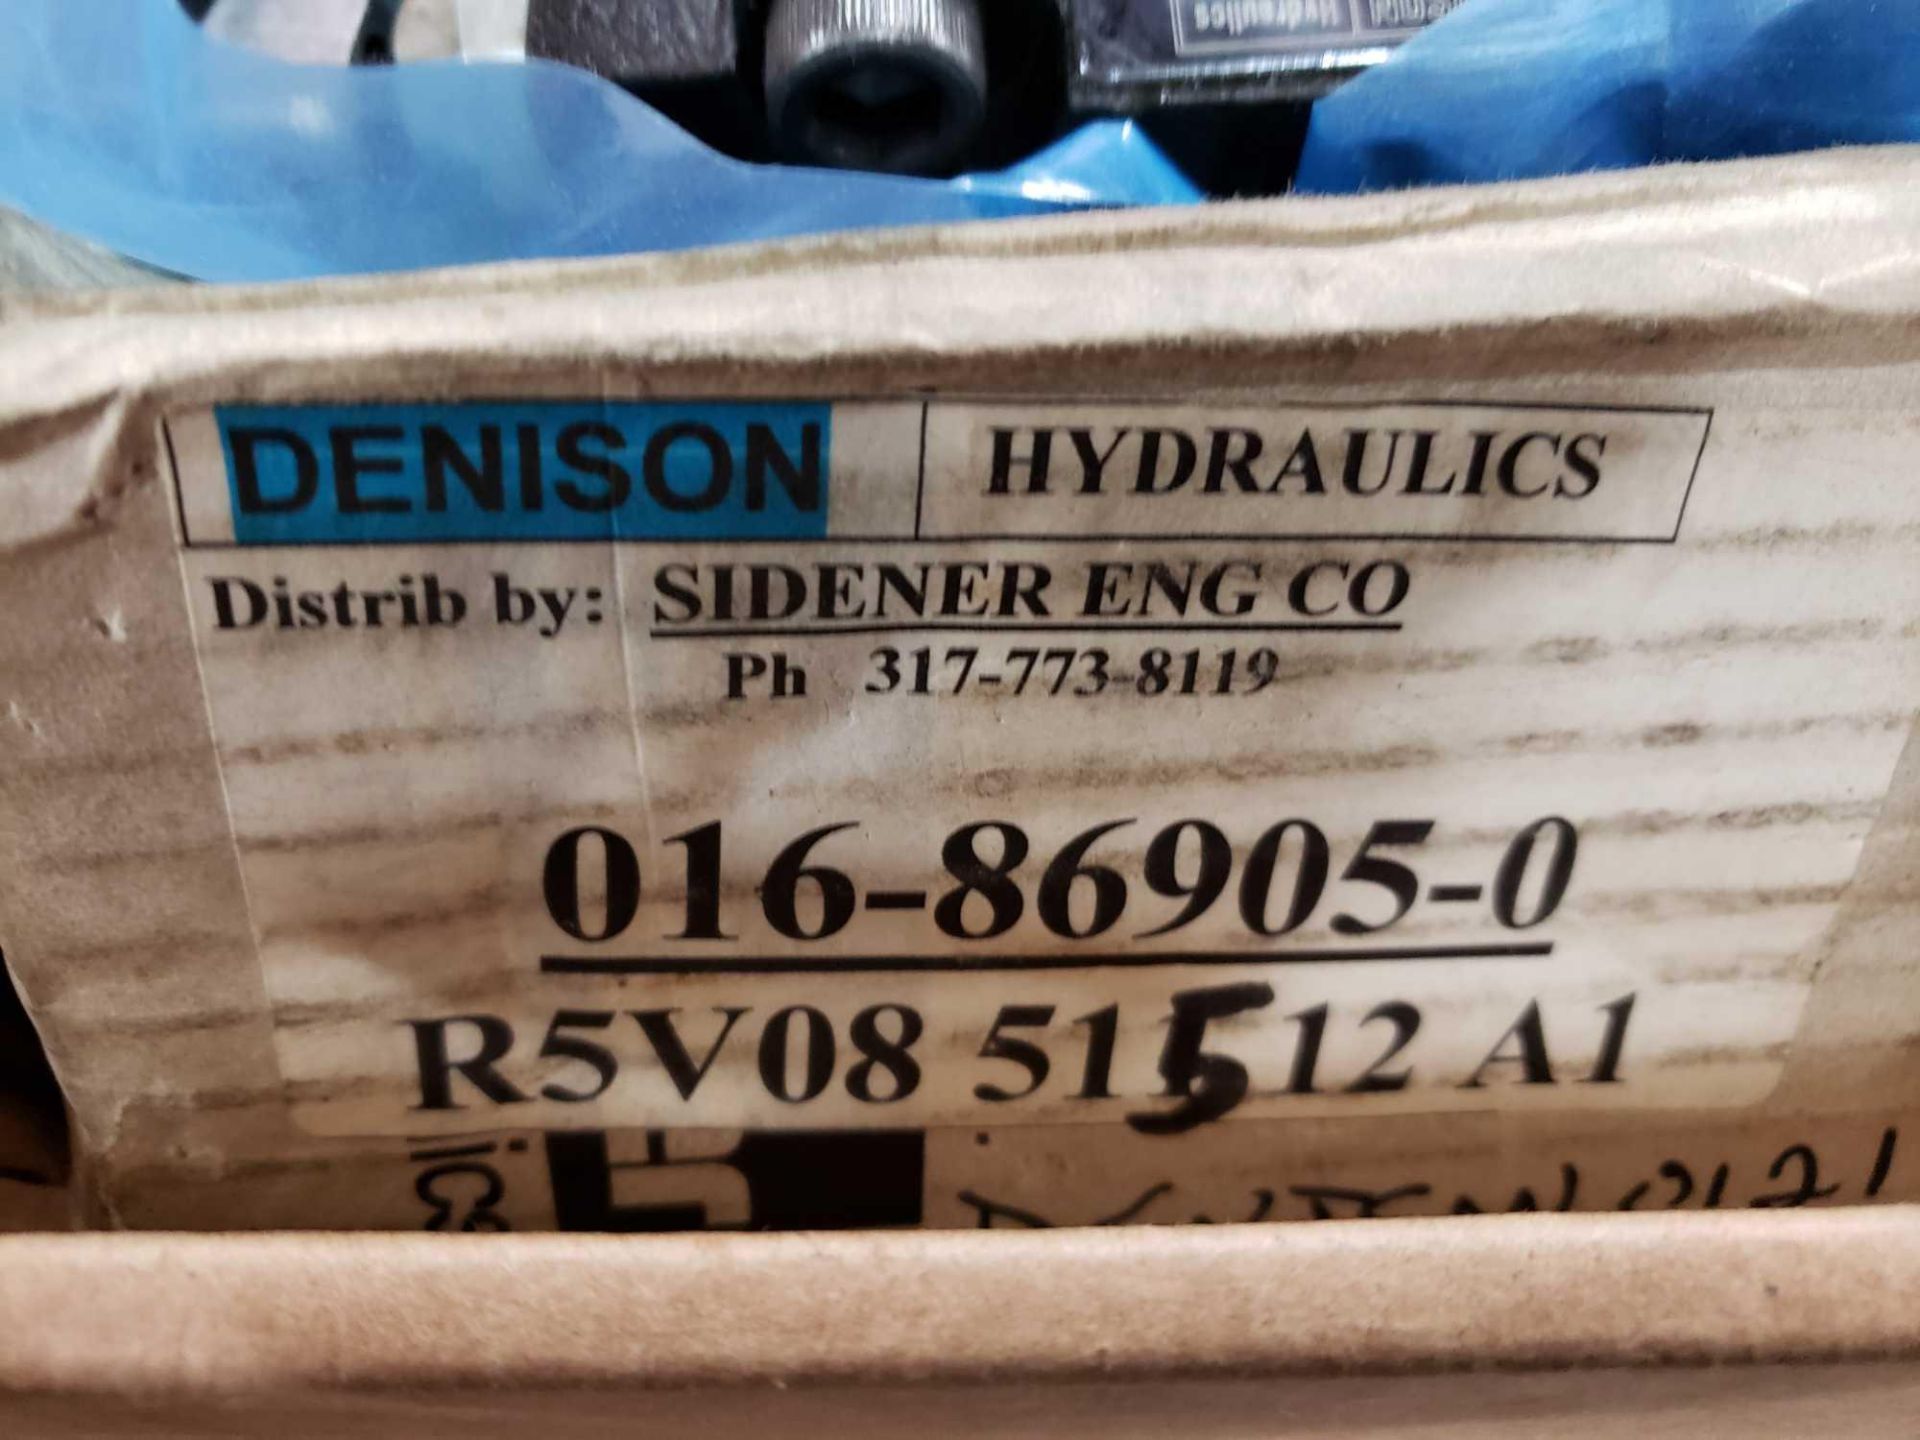 Denison Hydraulics valve. Model R5V08-51512-A1, part number 016-86905-0. New in box. - Image 2 of 4